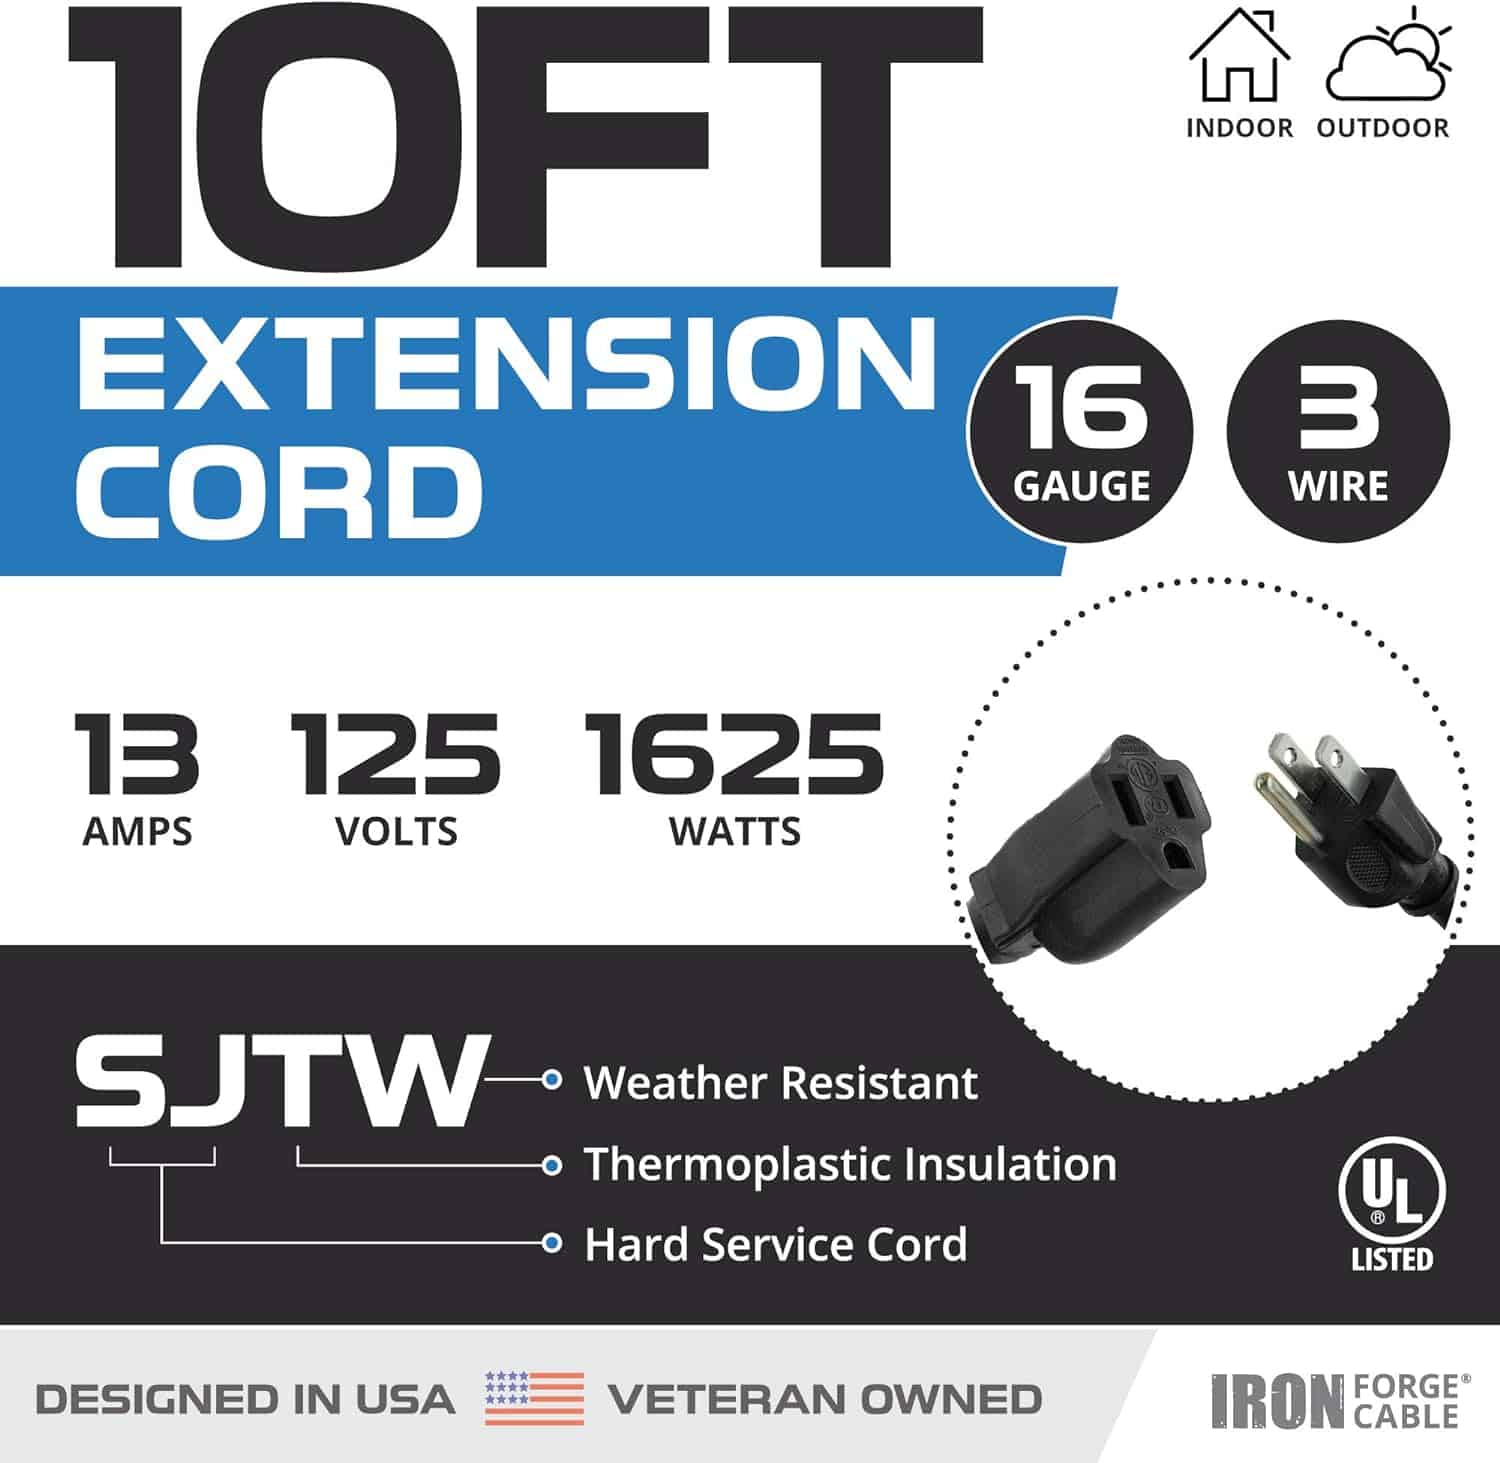 Iron Forge Cable Black Extension Cord 10 Ft, 2 Pack, 16 3 Outdoor Extension Cord 3 Prong 13 AMP, SJTW Weatherproof Exterior Power Cable 10 Foot Great for Outdoor Lights Decoration Leaf Blower 3